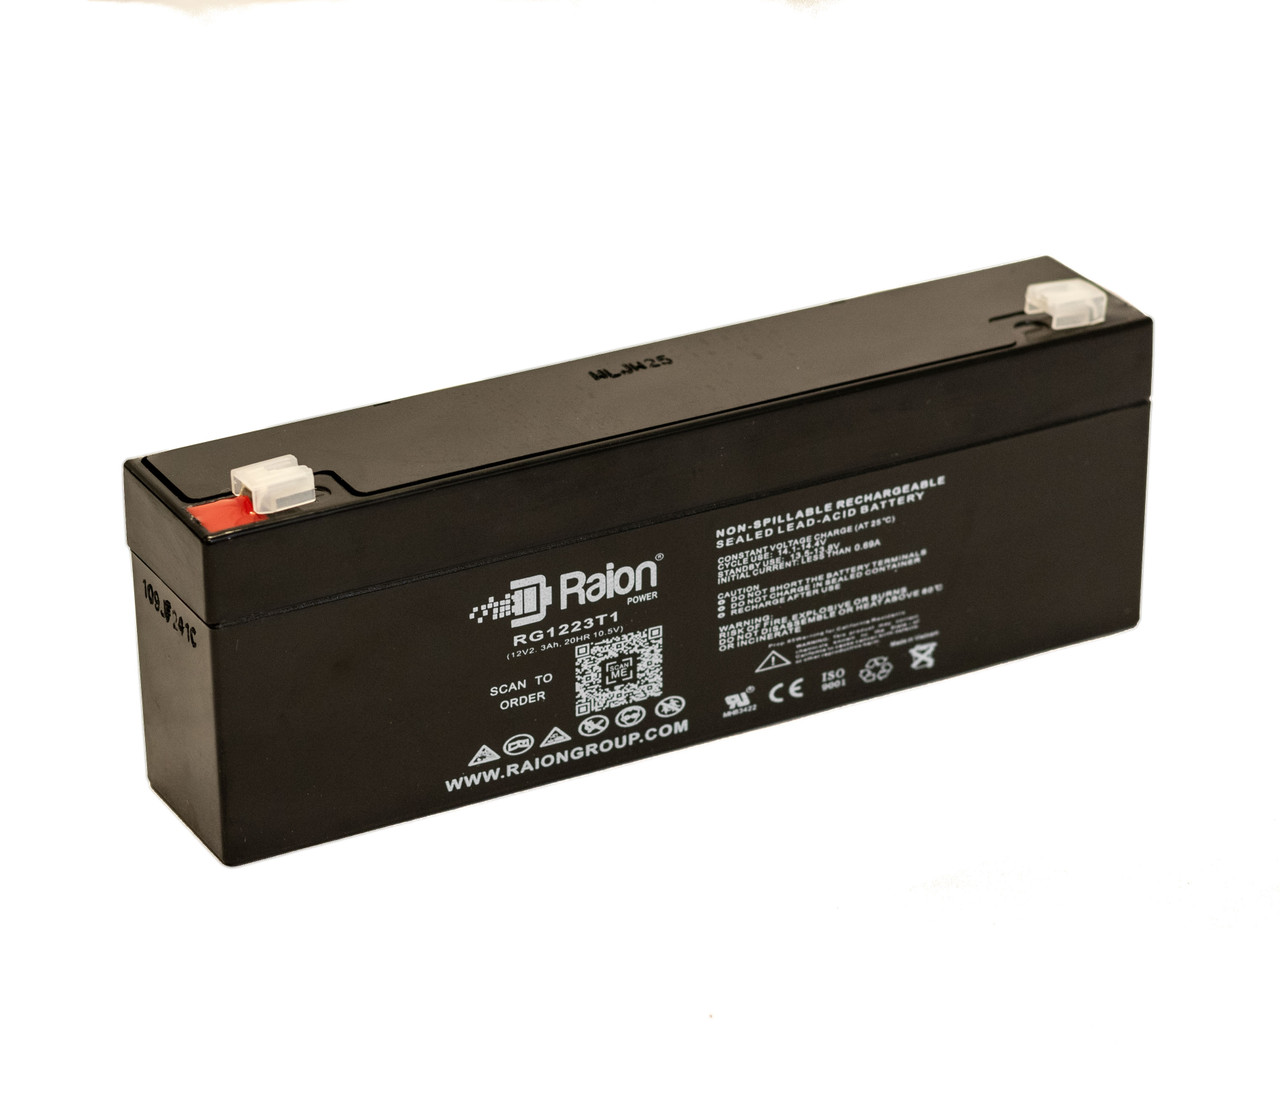 Raion Power RG1223T1 Replacement Battery for Ivac Medical Systems 500 KEOFEED